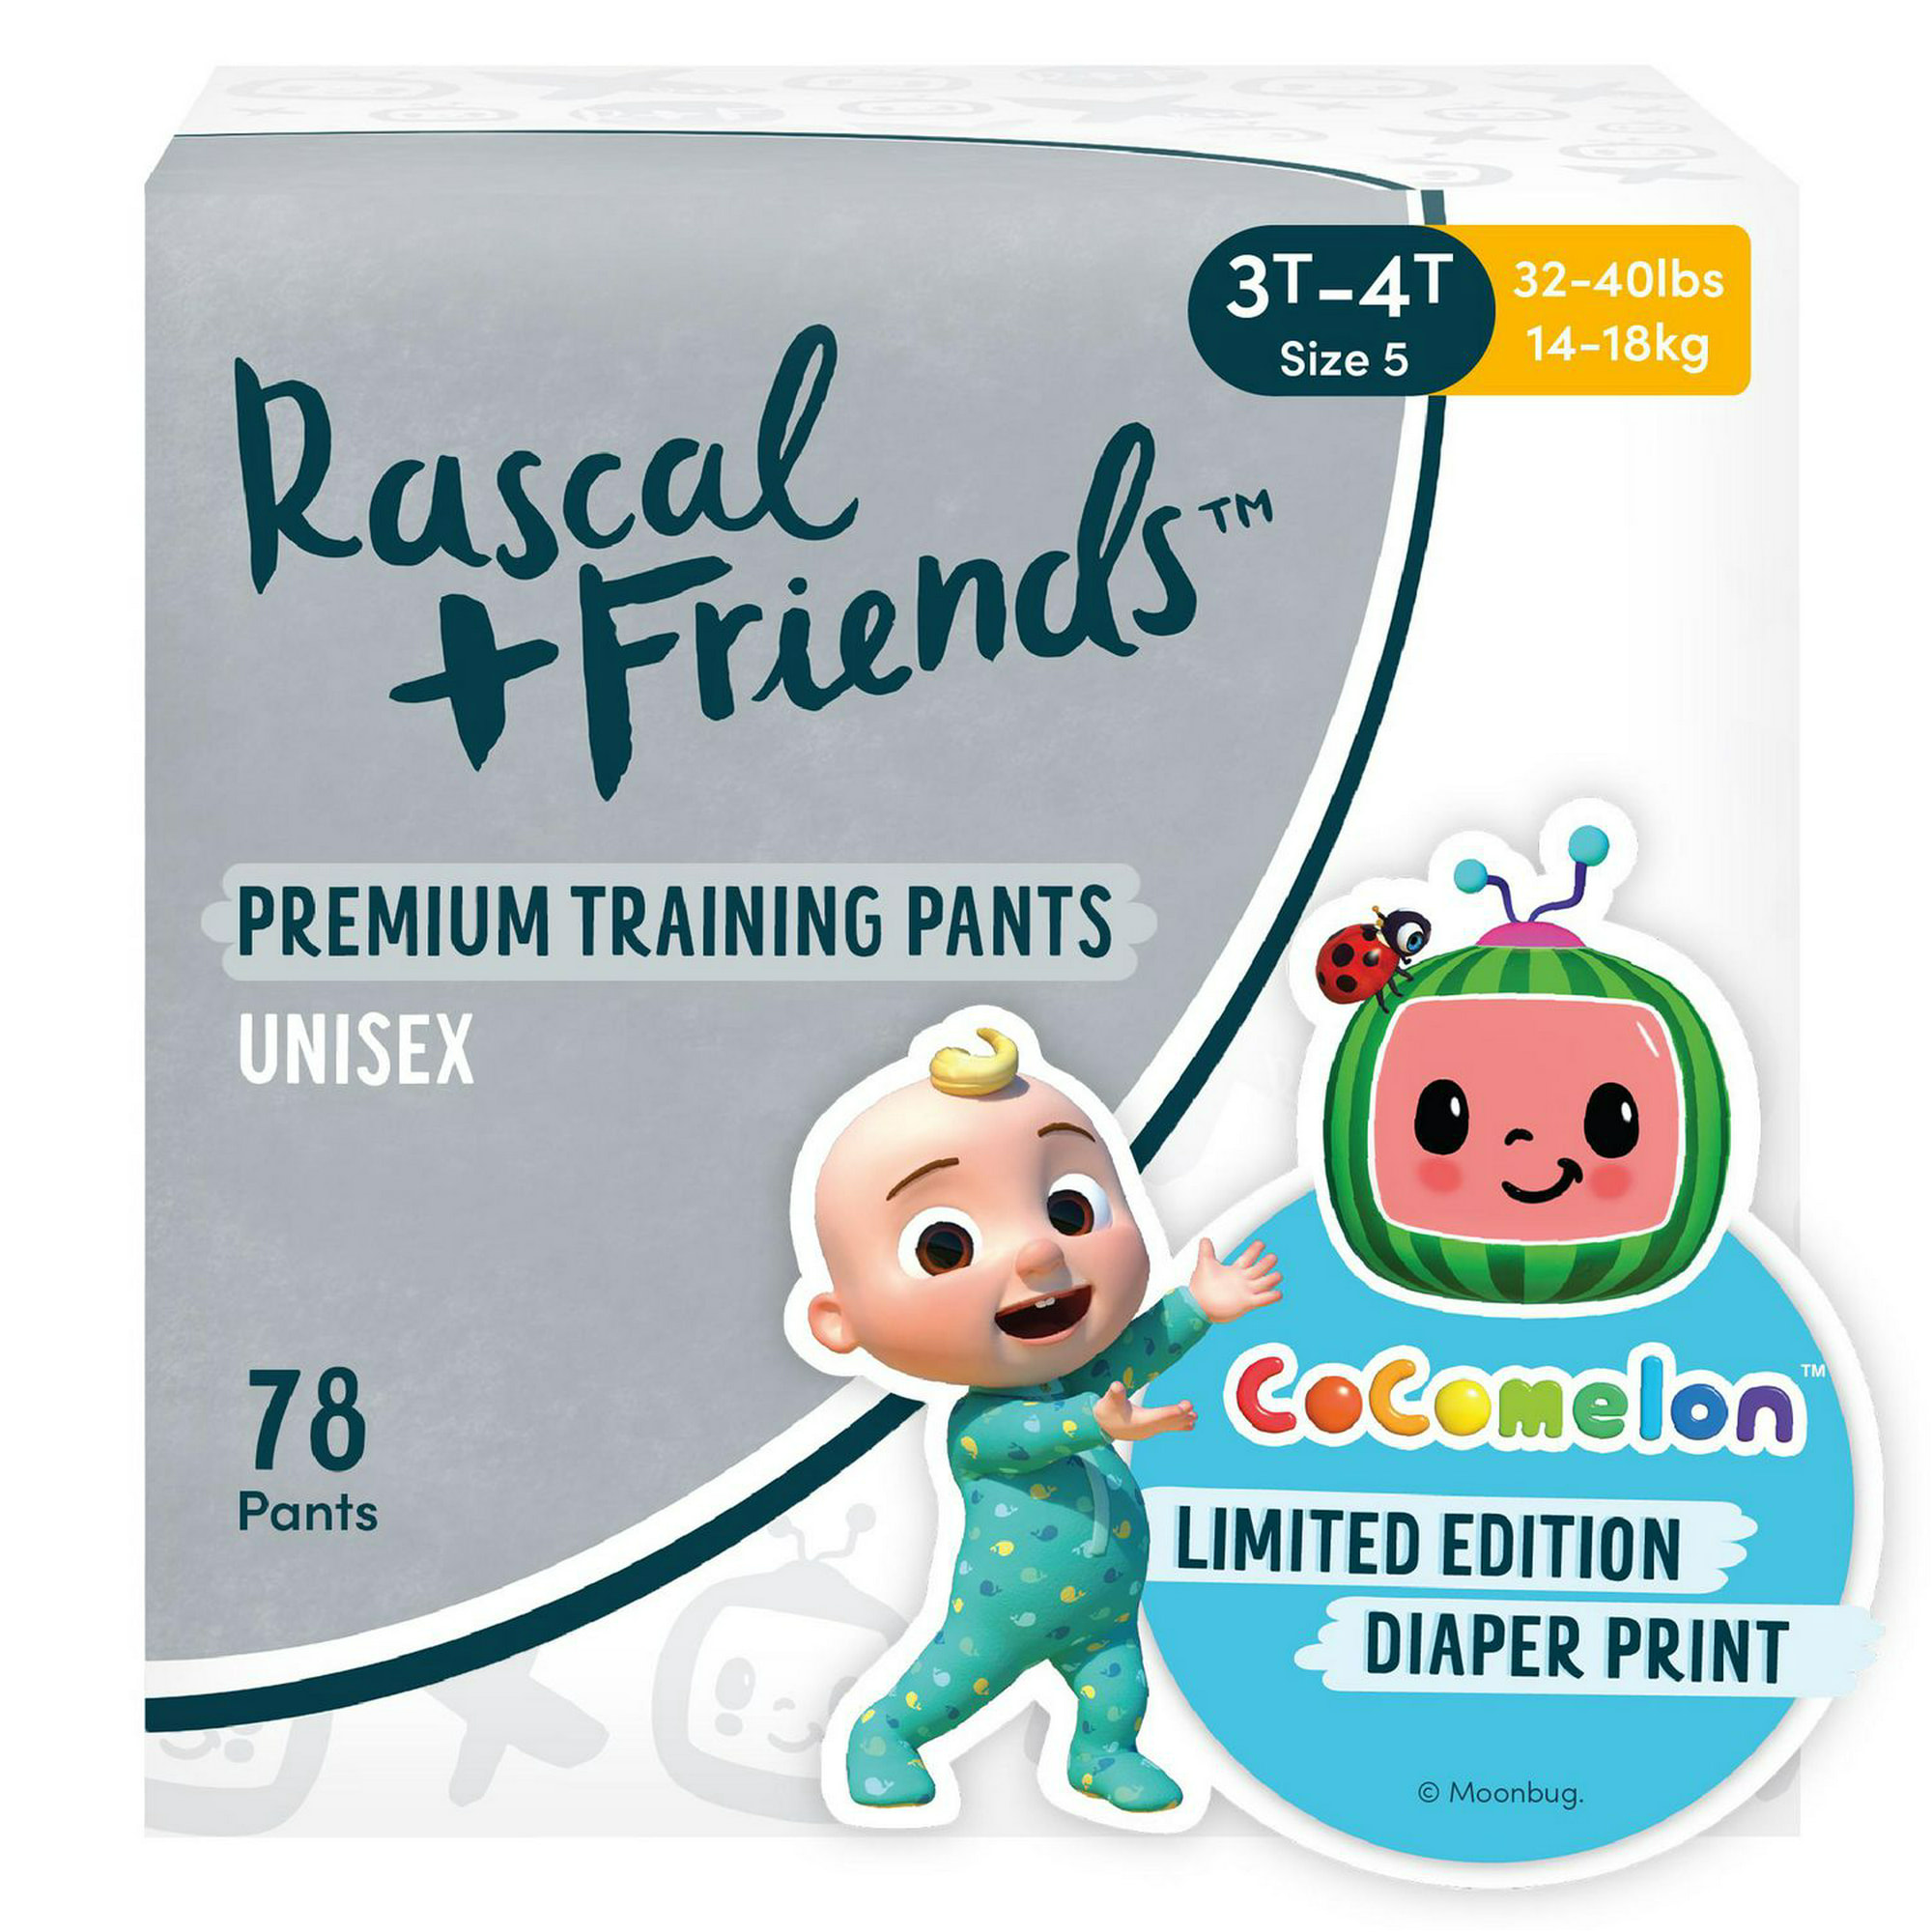 Find more New Parents Choice Girls Training Pants 2t-3t for sale at up to  90% off